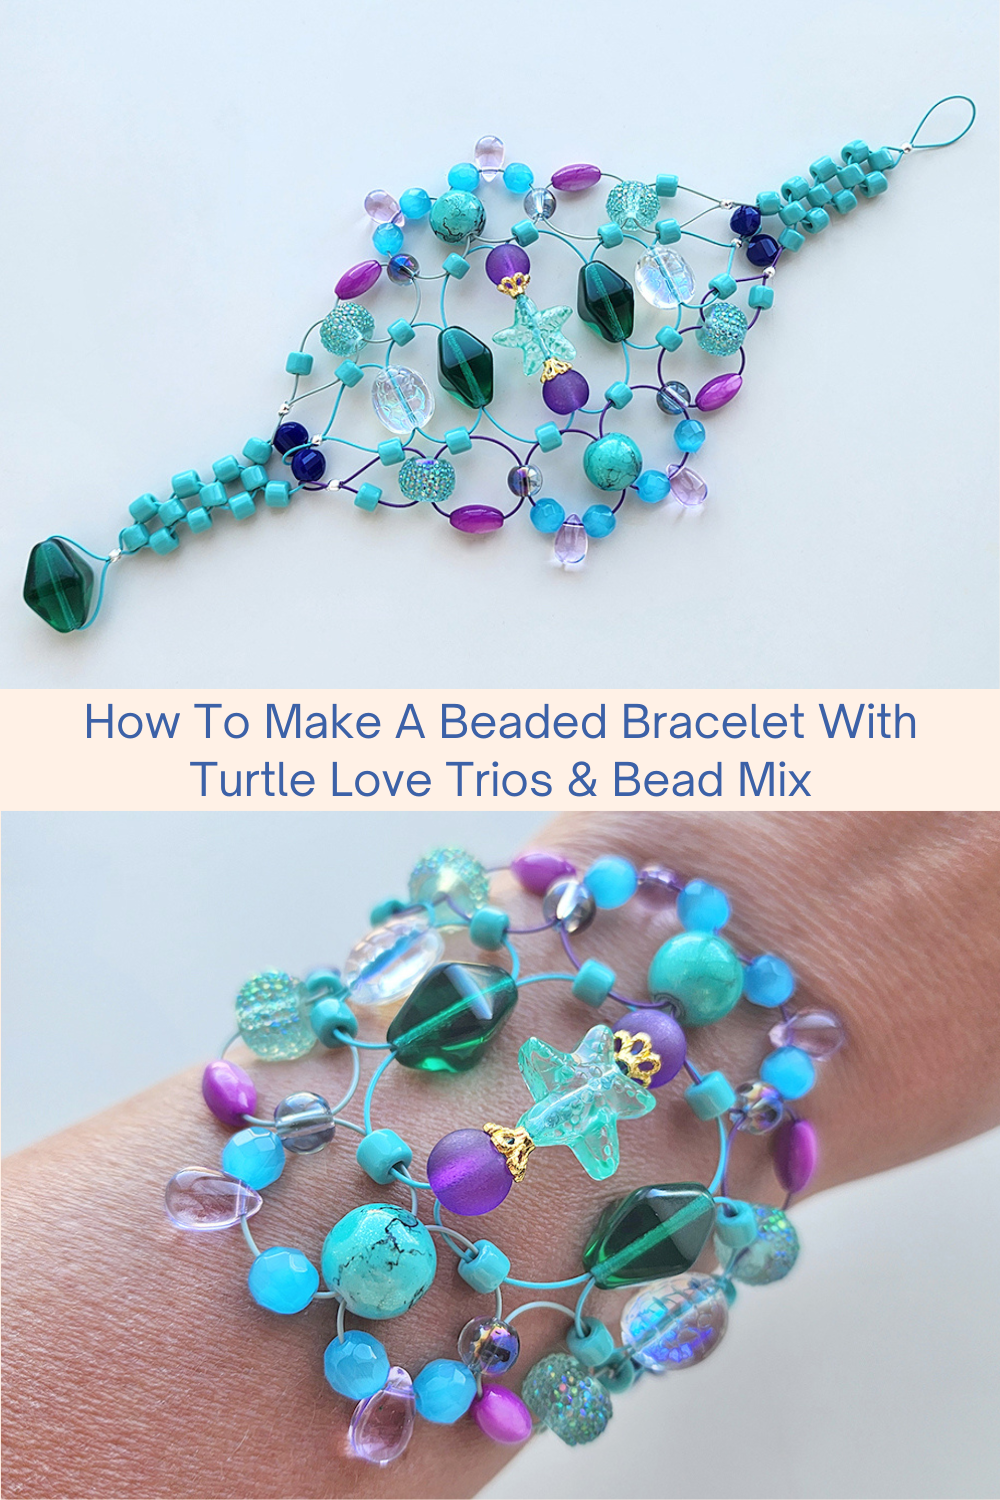 How To Make A Beaded Bracelet With Turtle Love Trios & Bead Mix Collage